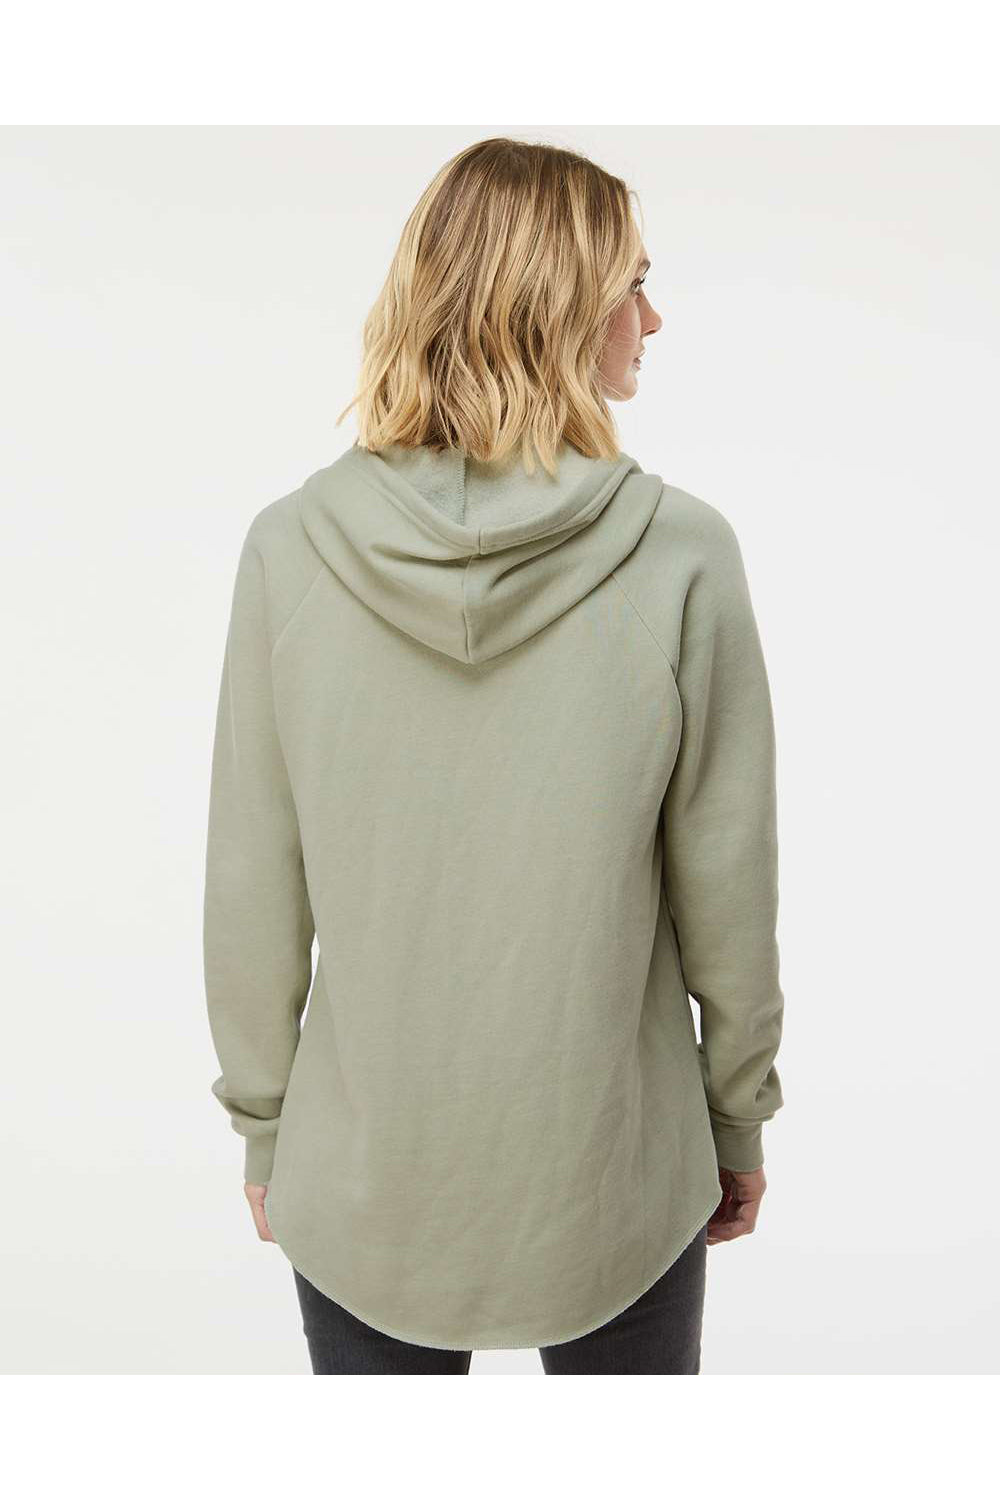 Independent Trading Co. PRM2500 Womens California Wave Wash Hooded Sweatshirt Hoodie Sage Green Model Back